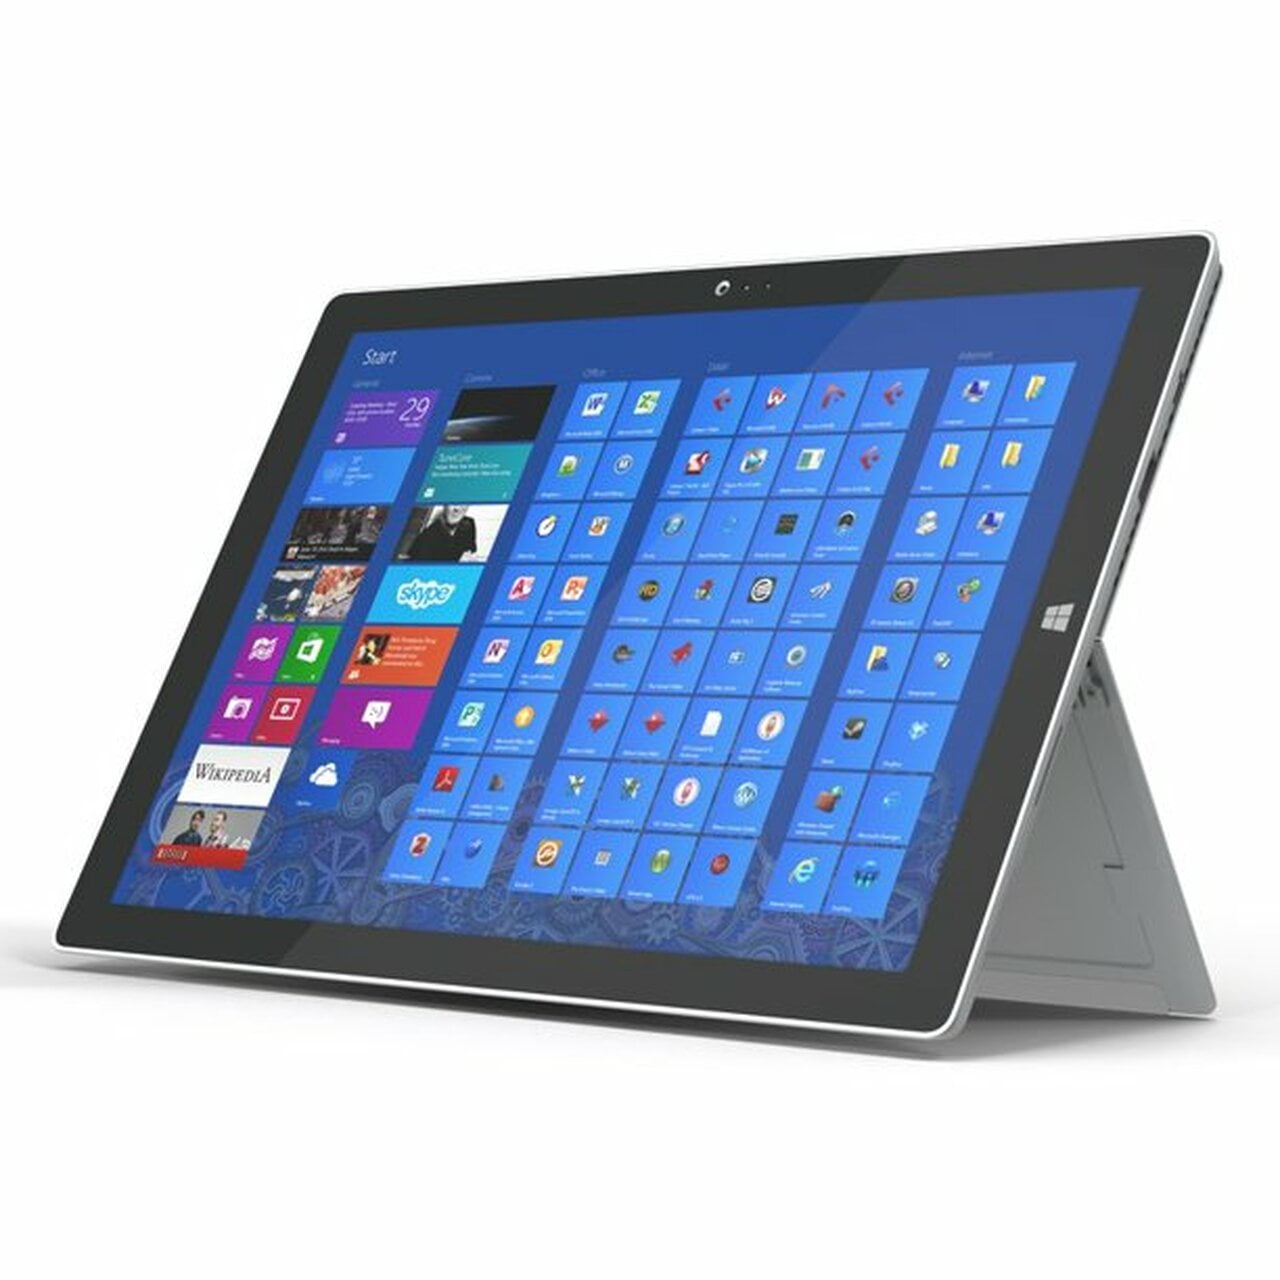 PC/タブレット タブレット Restored Microsoft Surface Pro 3 Model 1631 Intel Core i5 1.9GHz 